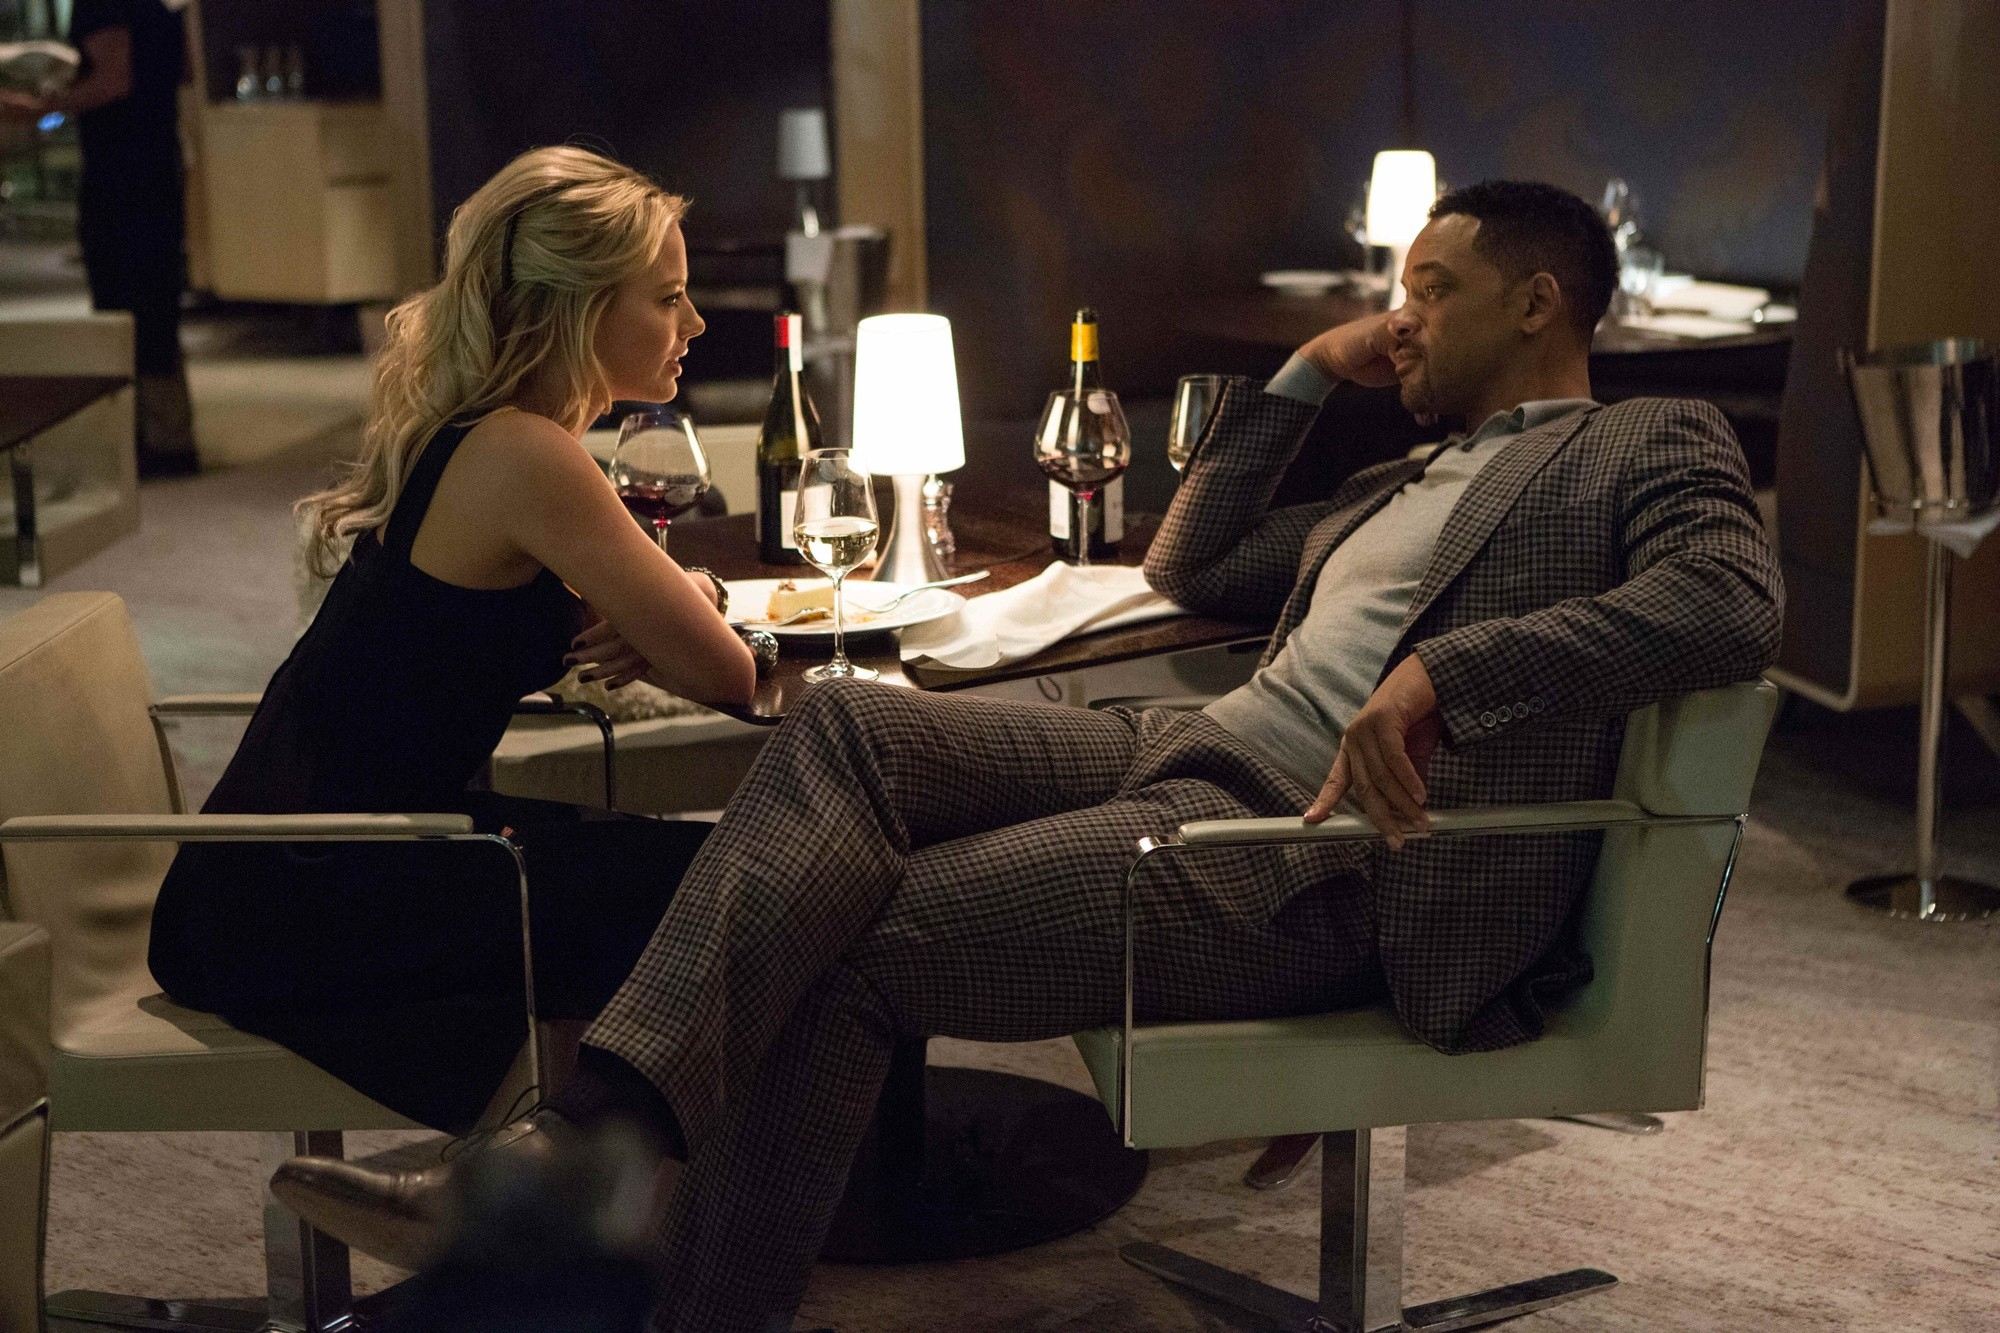 Margot Robbie stars as Jess Barrett and Will Smith stars as Nicky in Warner Bros. Pictures' Focus (2015)